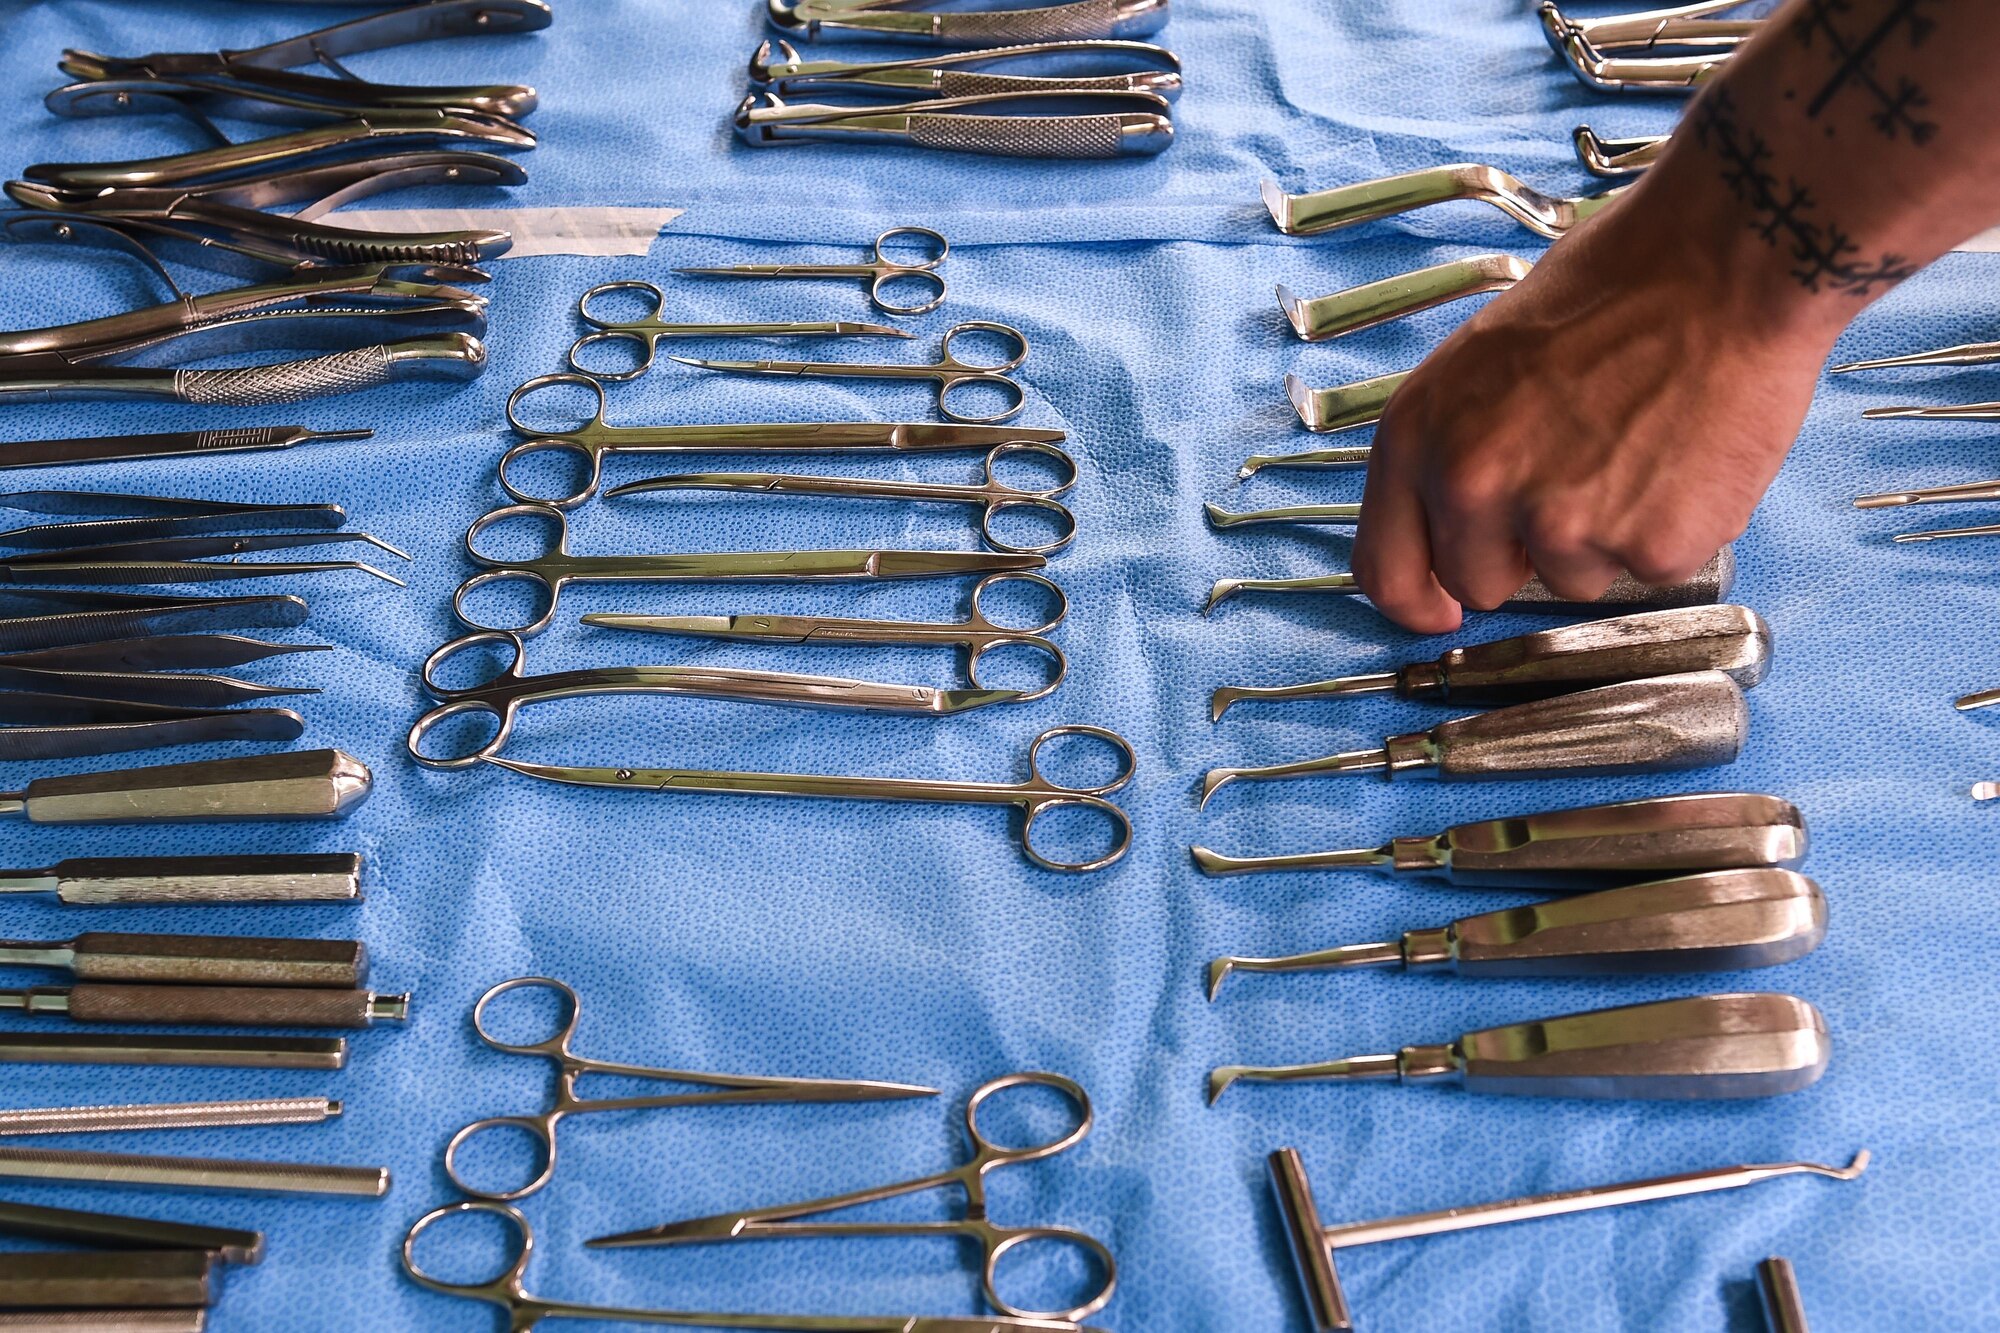 U.S. Army Spc. Tyler Novich, Joint Task Force-Bravo Medical Element dental specialist, reaches for a utensil to aid a dentist in extracting a patient’s tooth during a medical readiness training exercise, or MEDRETE, in the village of Bacadilla, Olancho district, Honduras, Sept. 23, 2016. During the two-day MEDRETE, the dental team treated 119 patients.